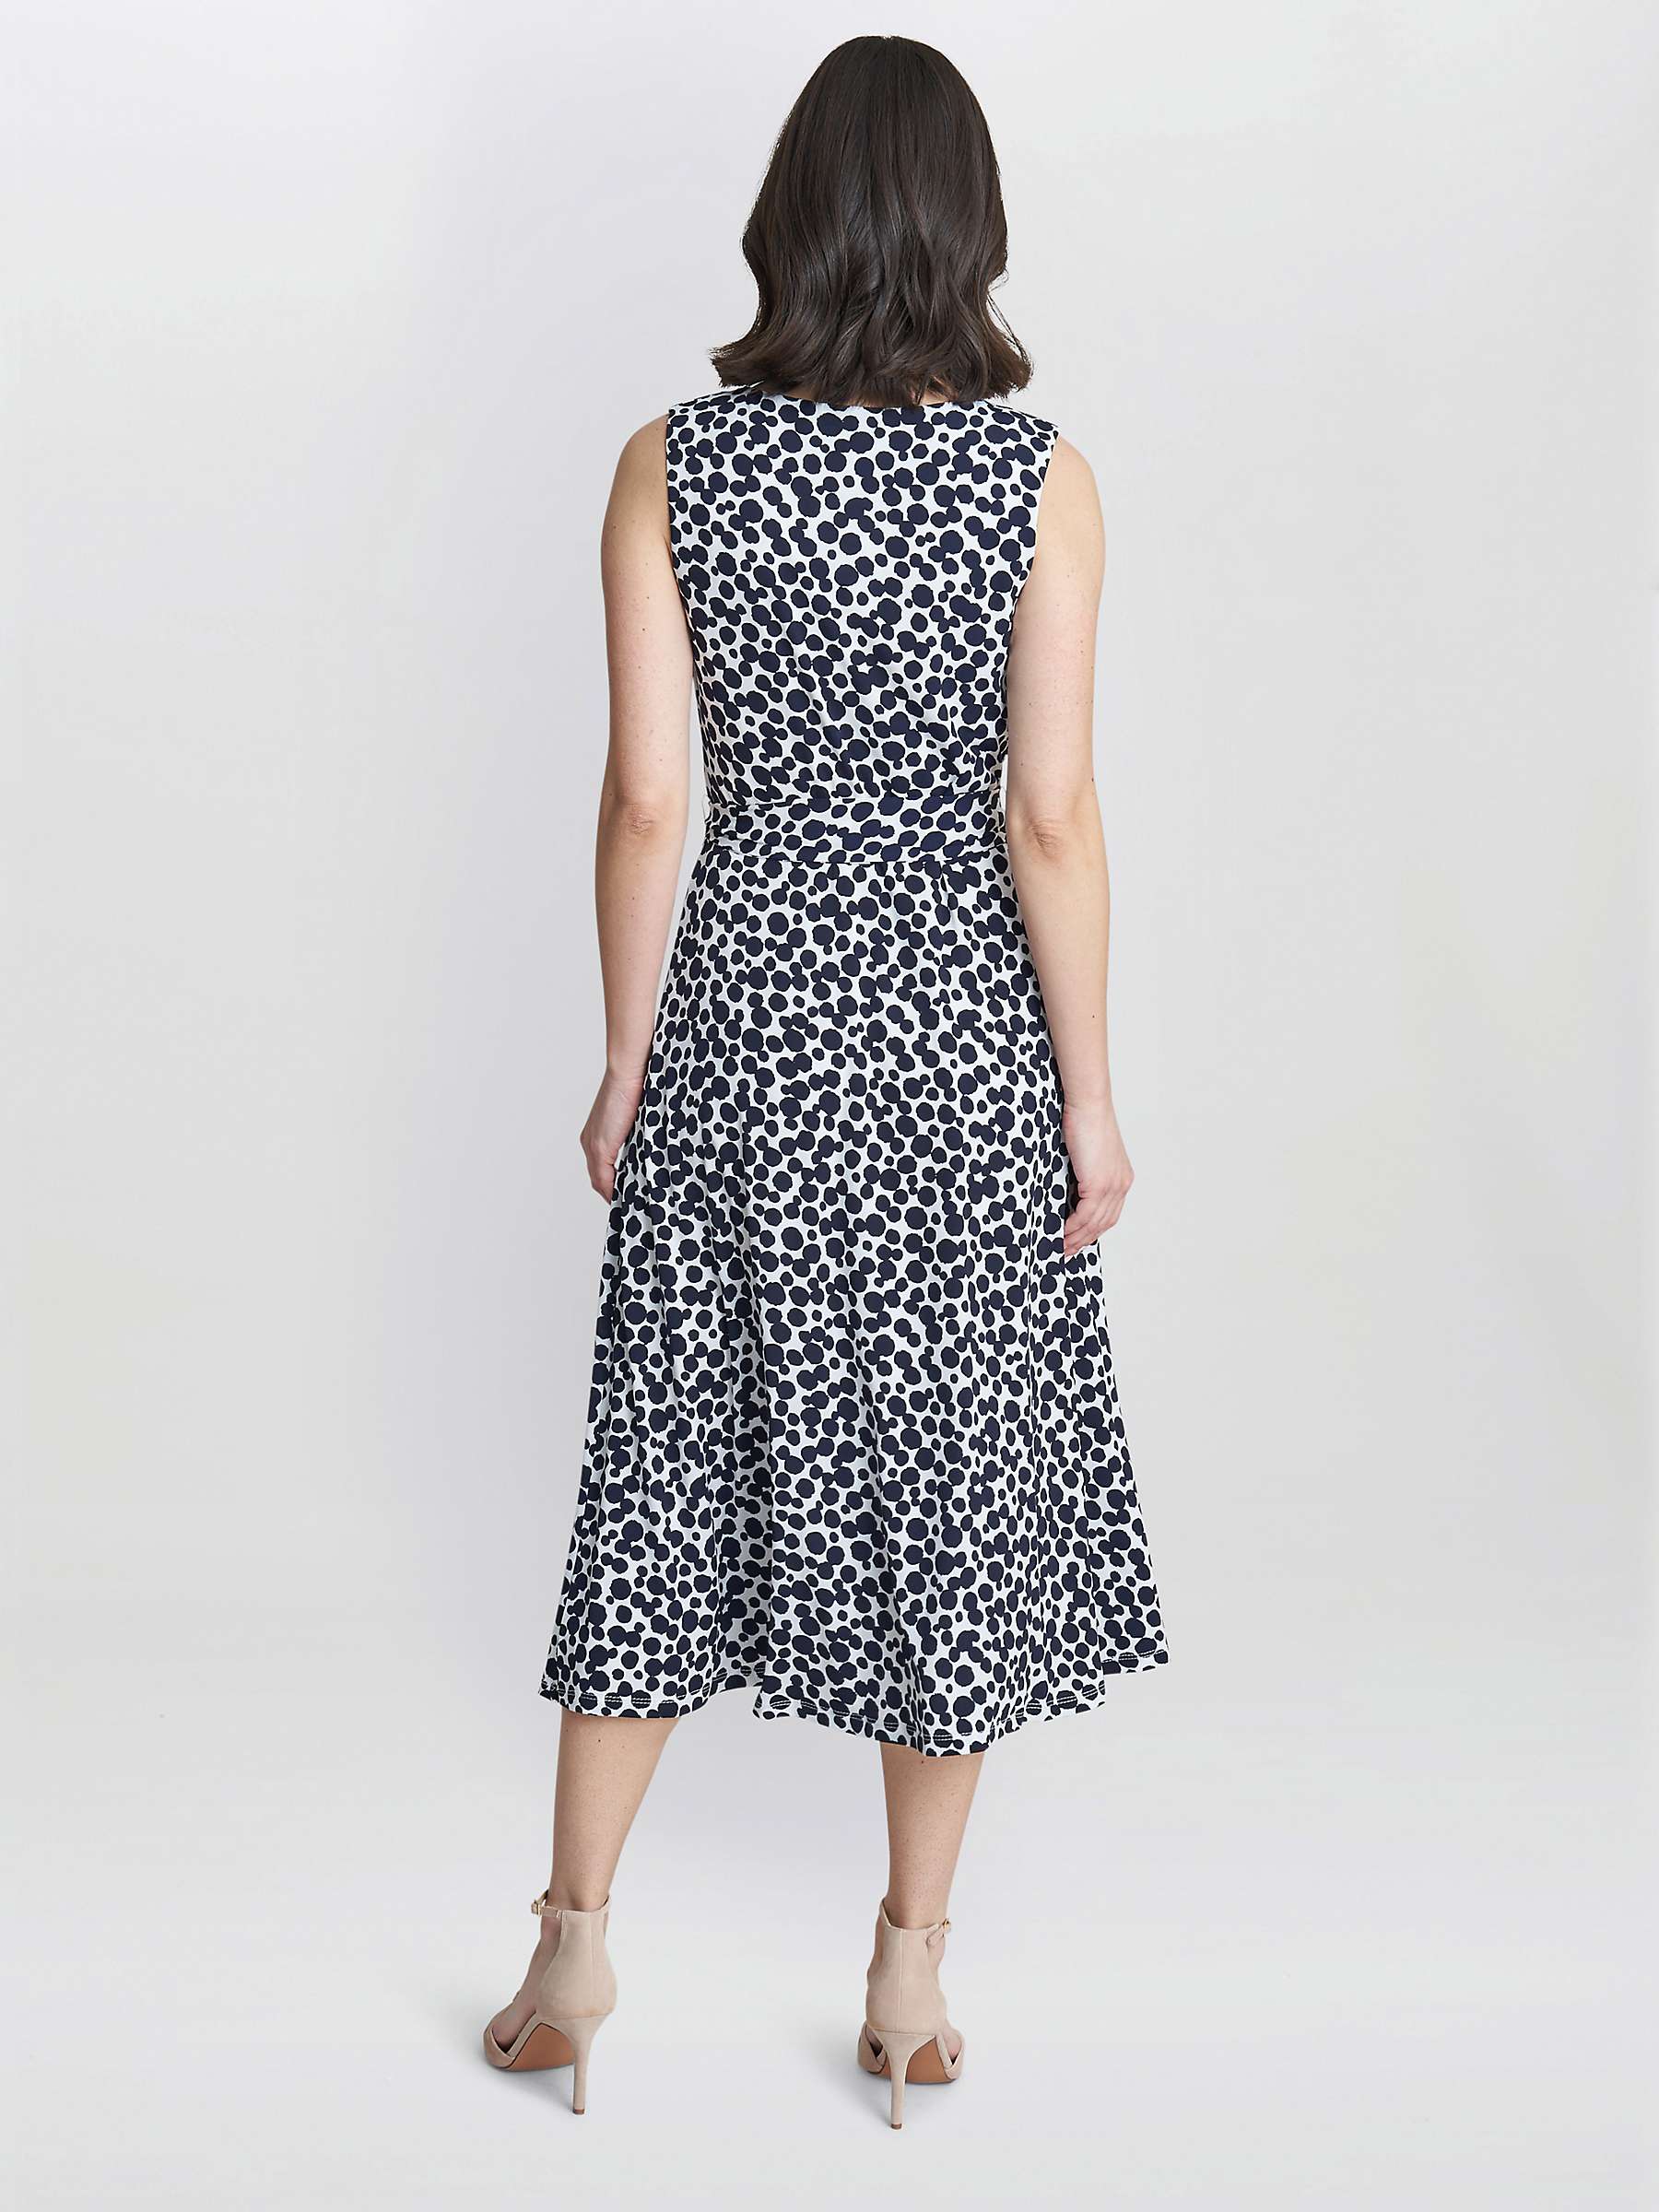 Buy Gina Bacconi Dolly Fit And Flare Jersey Dress, Navy/White Online at johnlewis.com